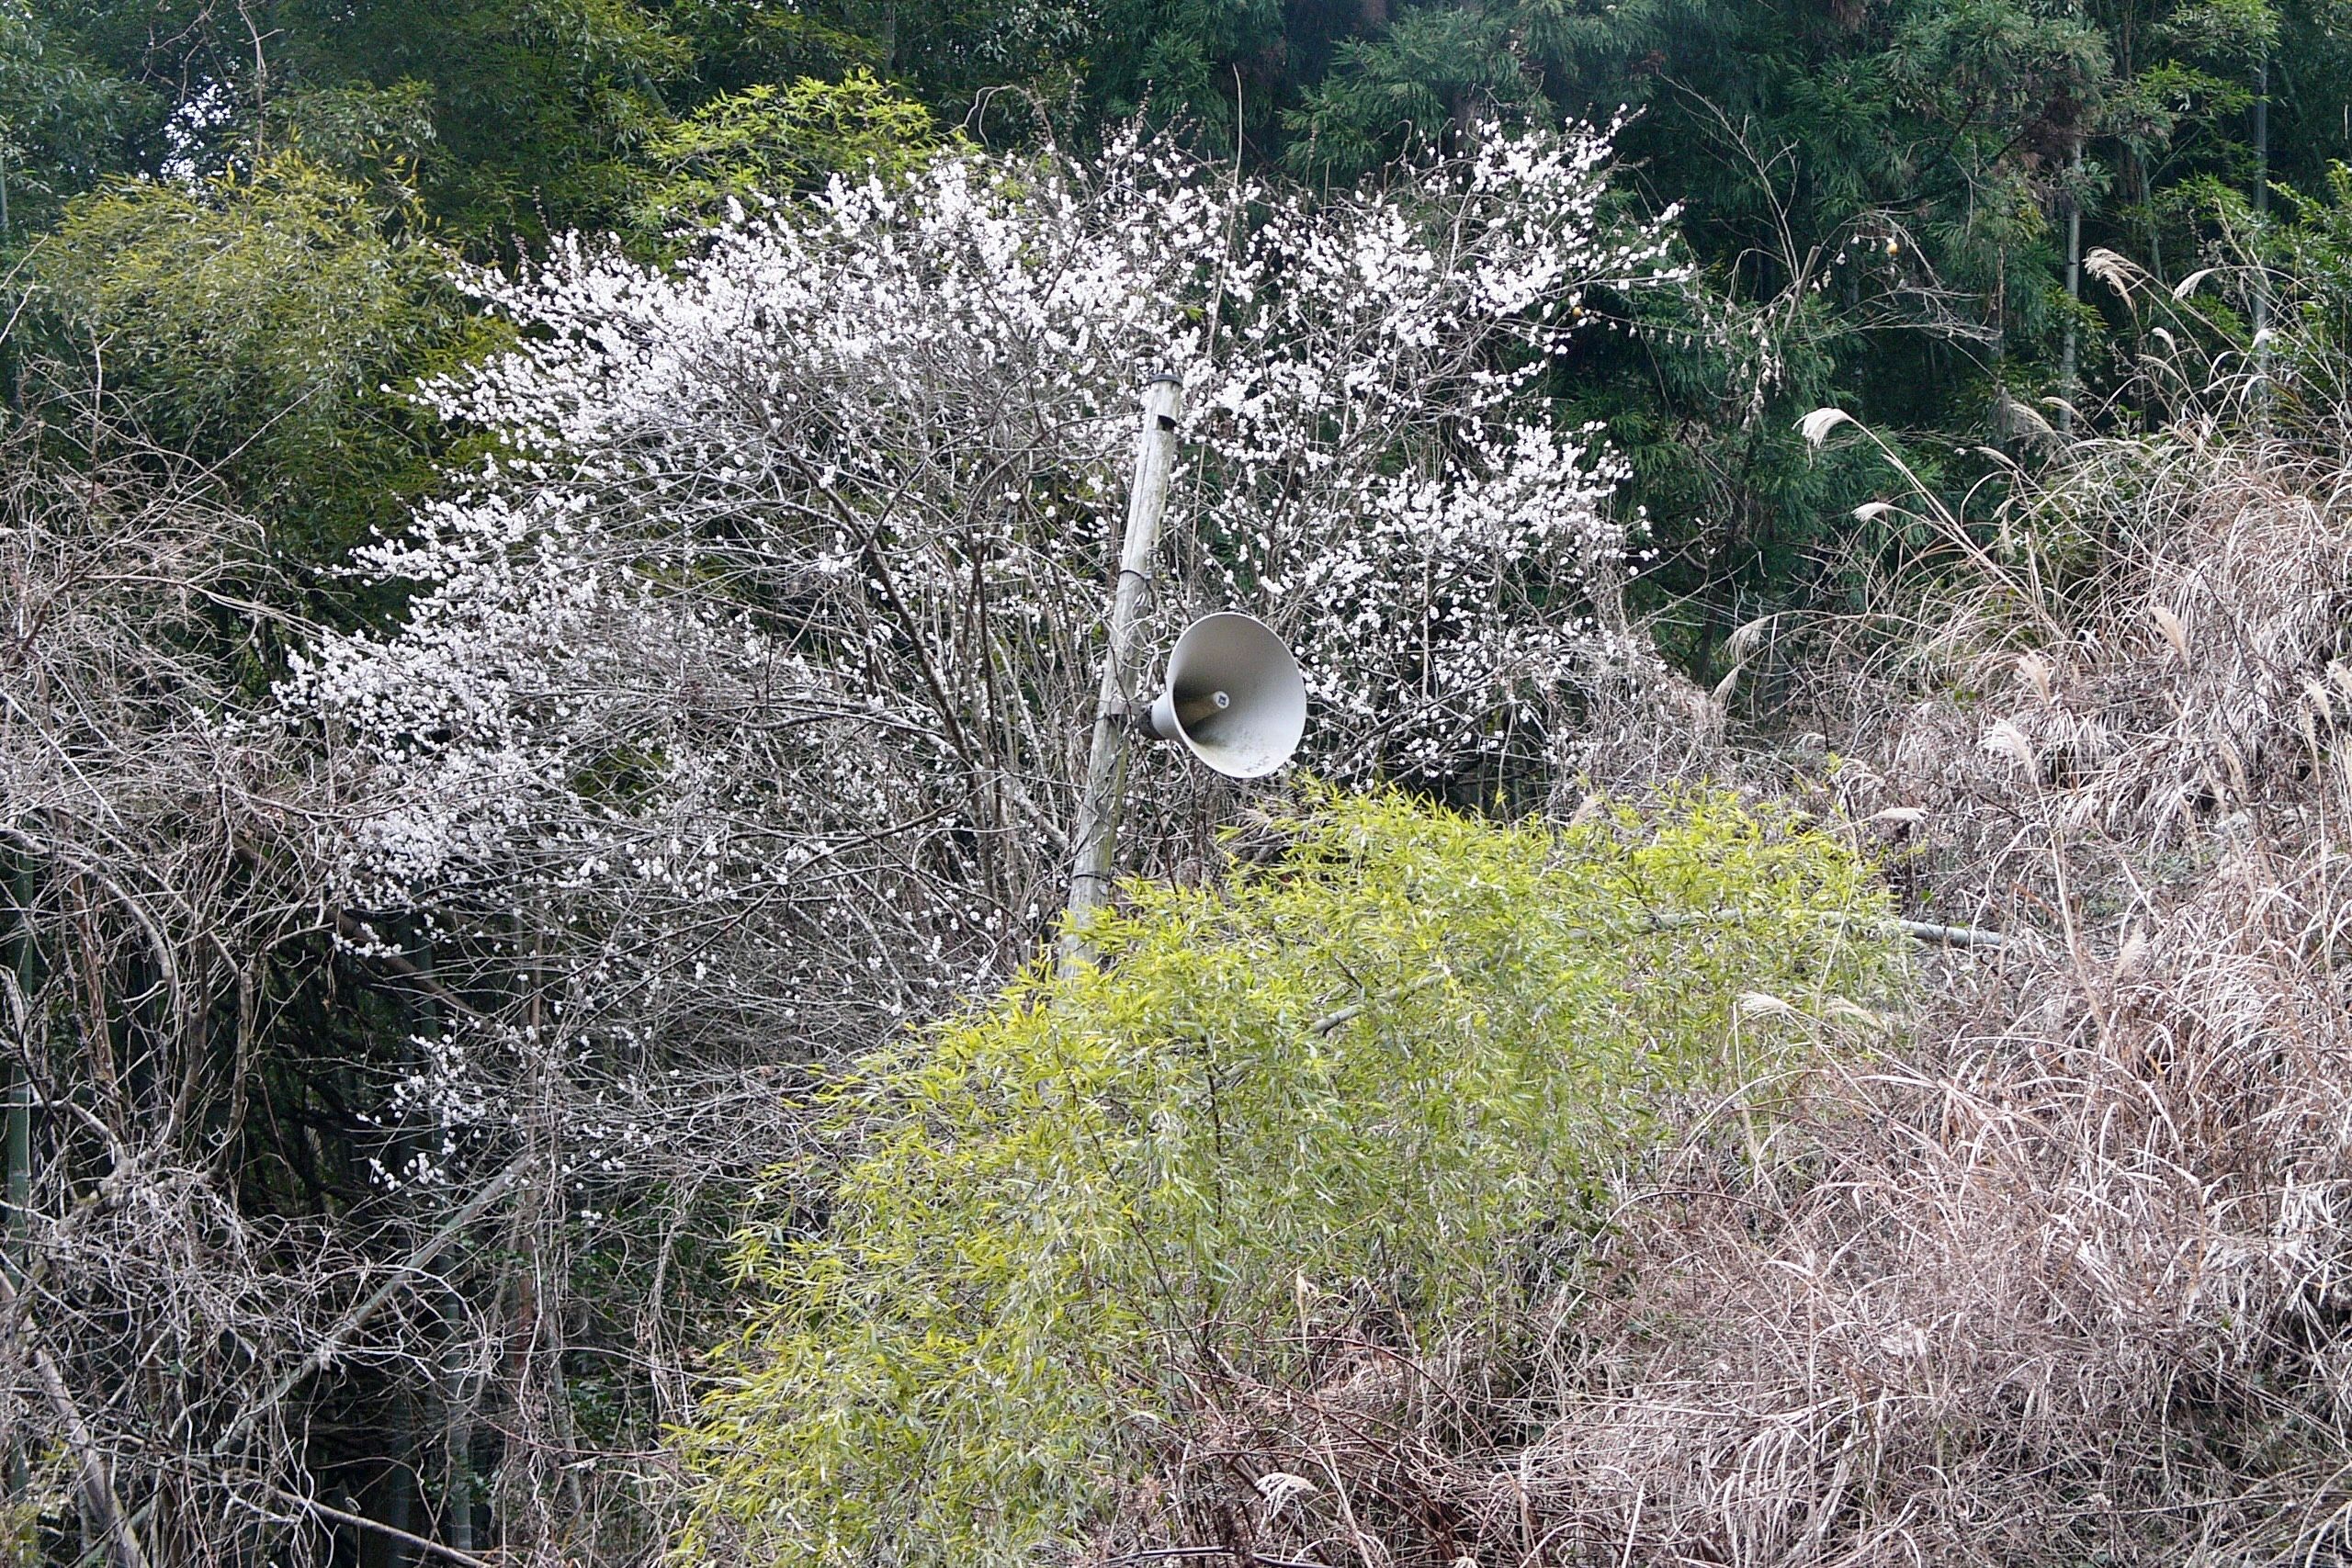 A loudspeaker pokes out of a dense forest of bamboo and a tree in bloom.